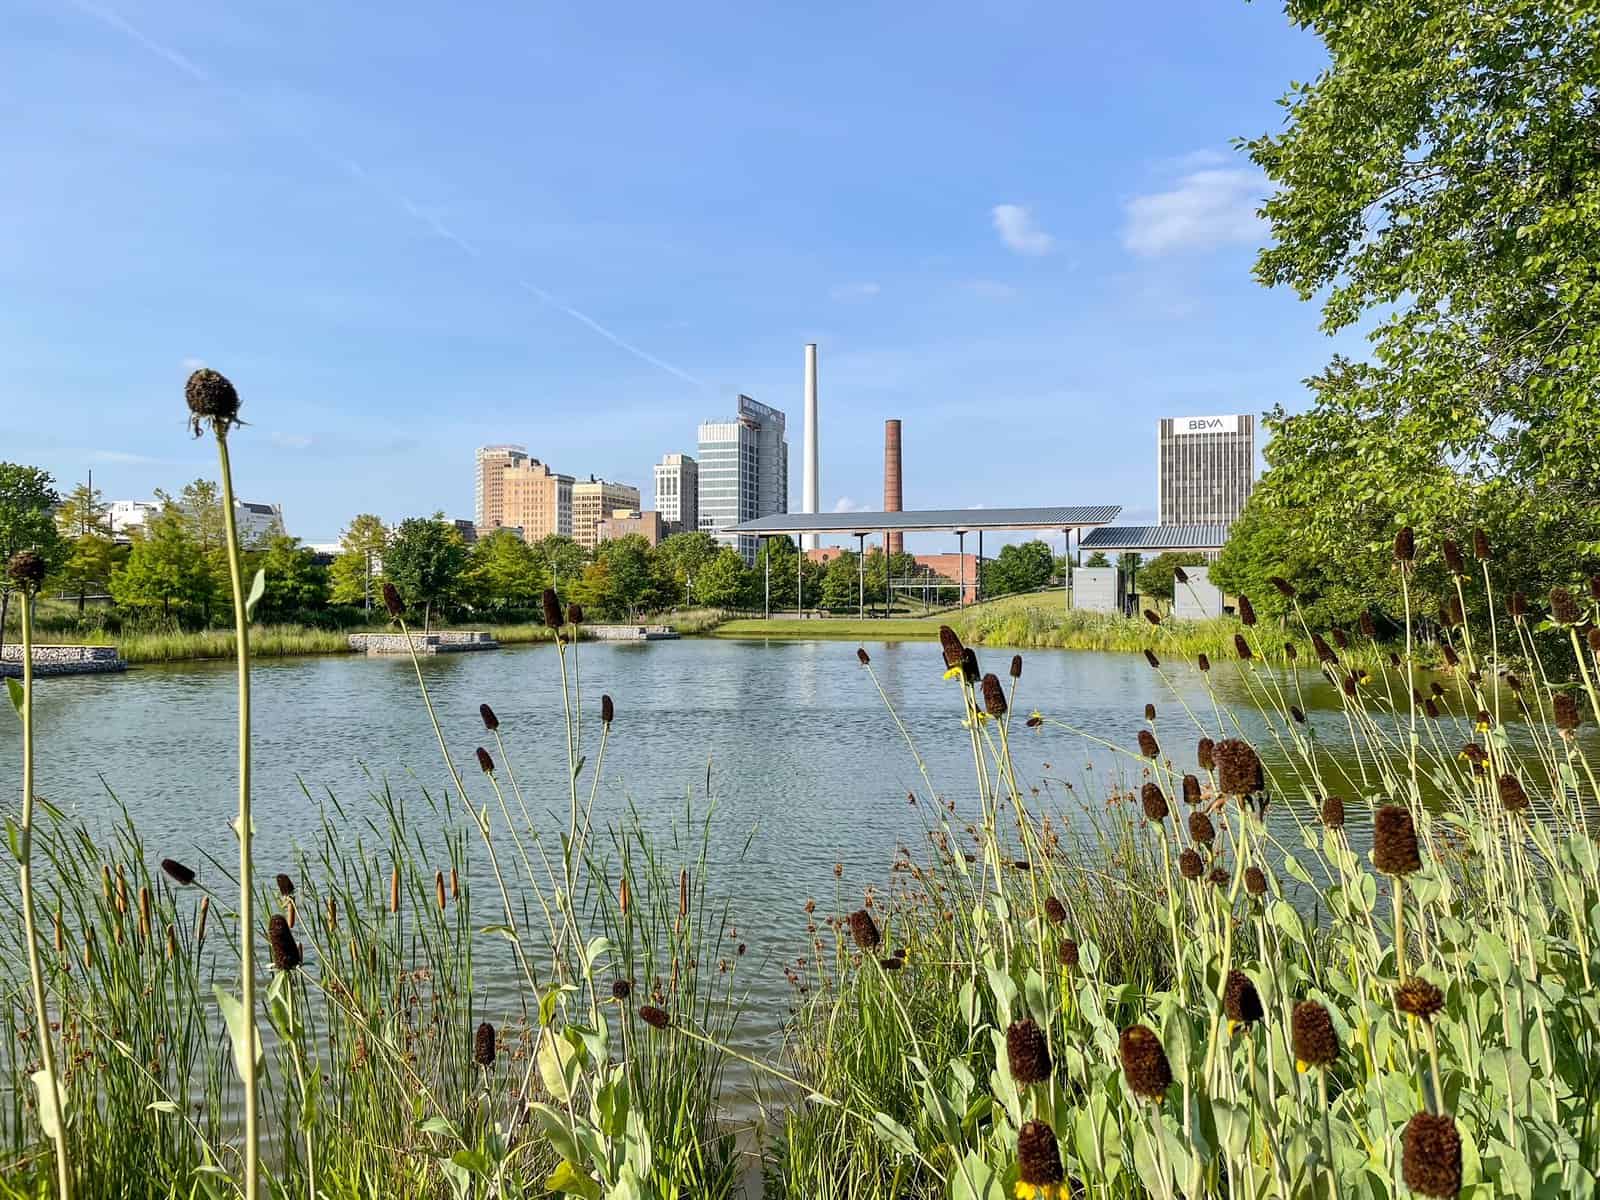 View of a small lake with flowers in the foreground and cities of Birmingham in the background at Railroad Park.